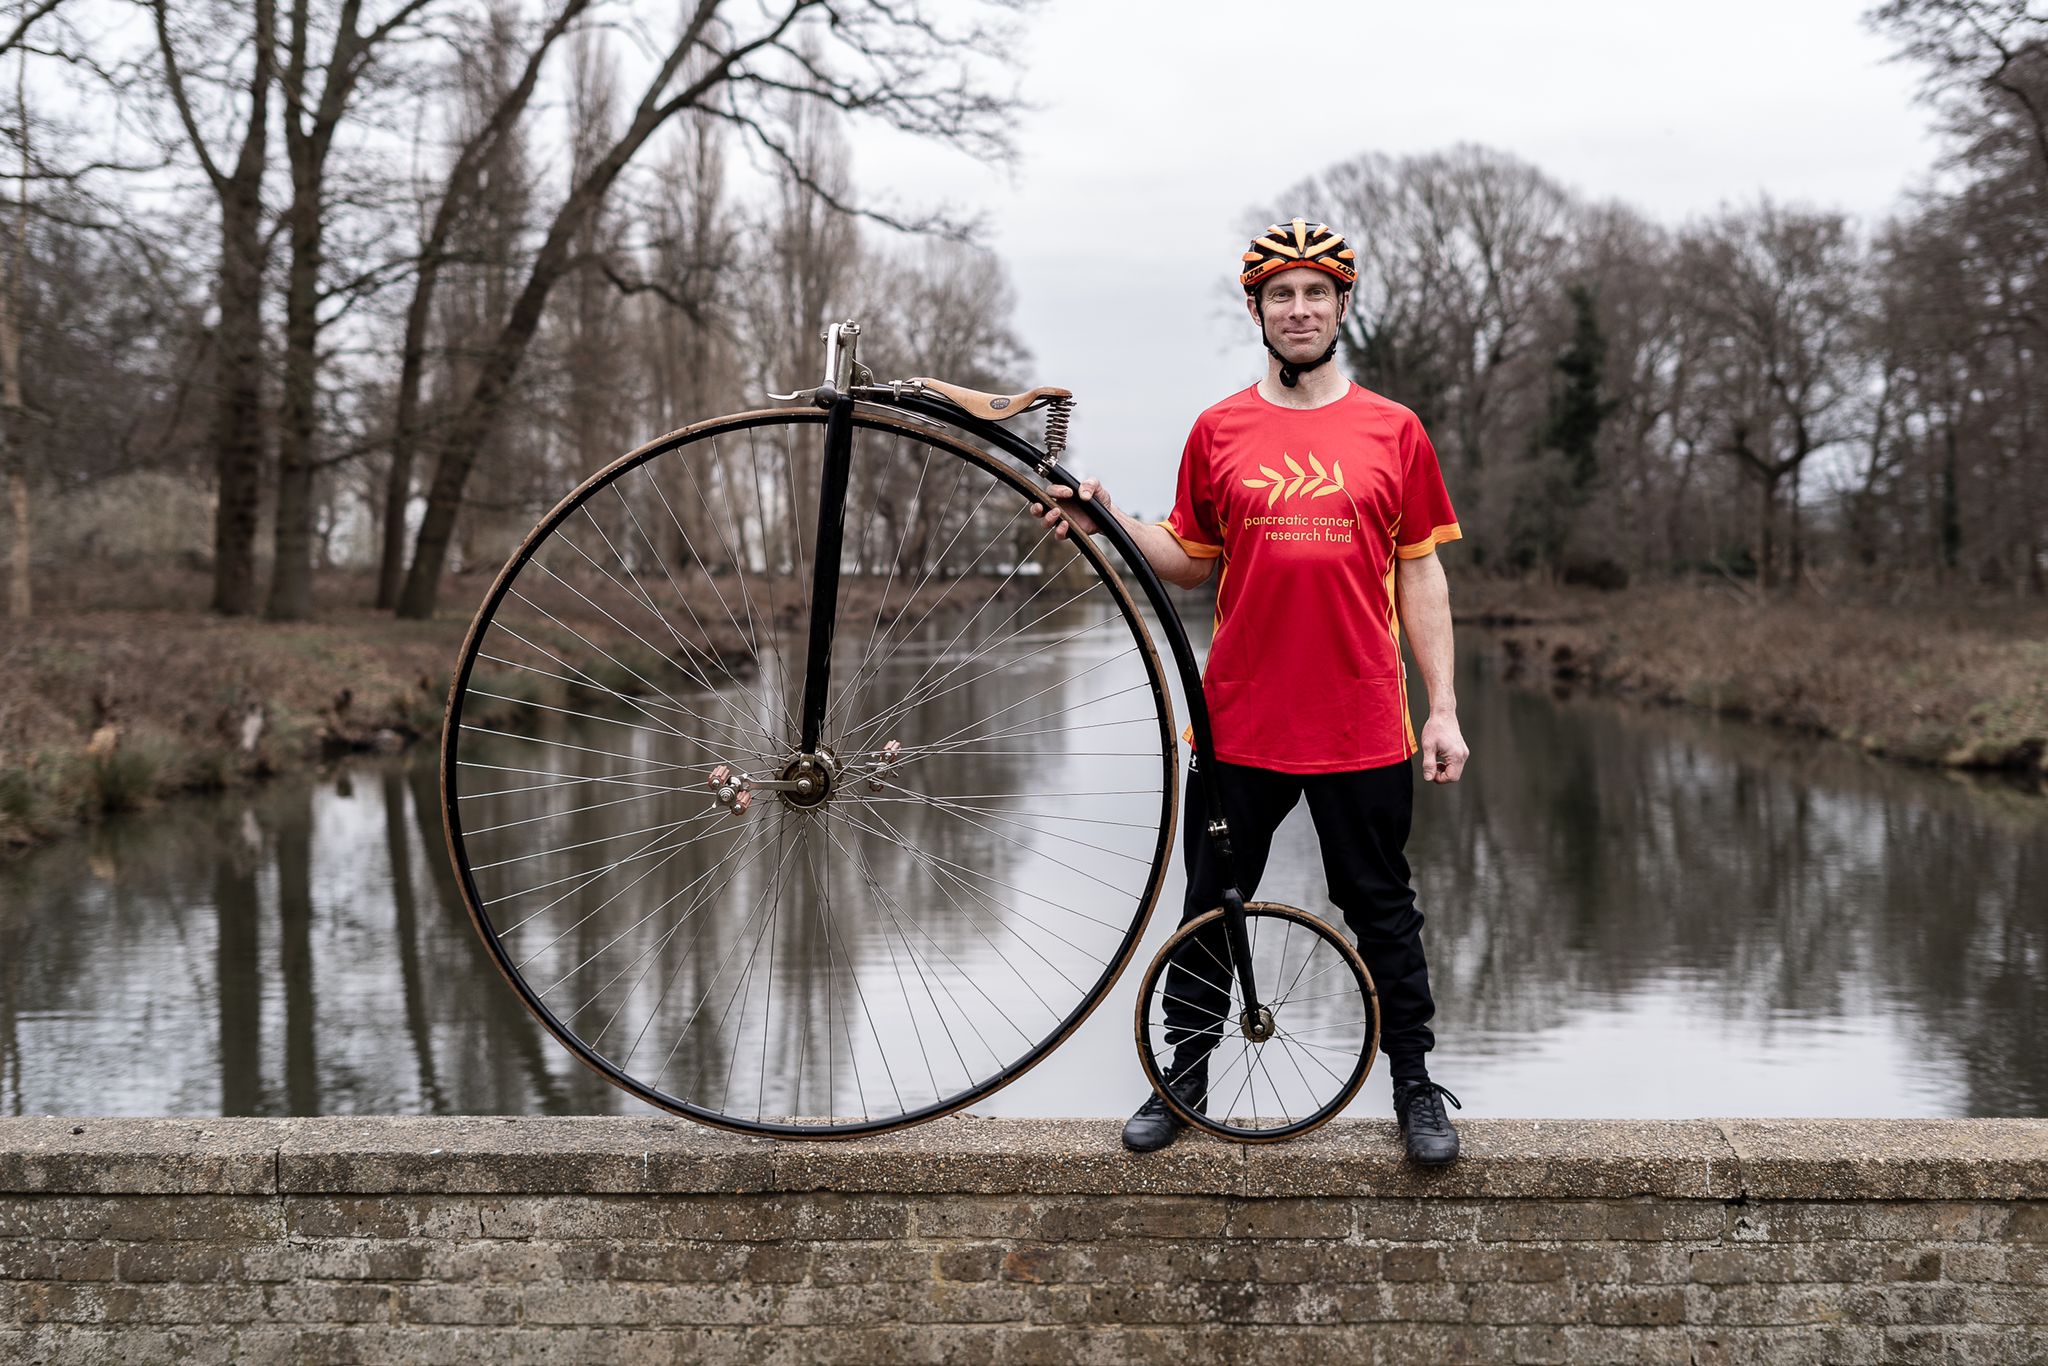 Michael Gray stands with Penny Farthing wearing PCRF T-shirt